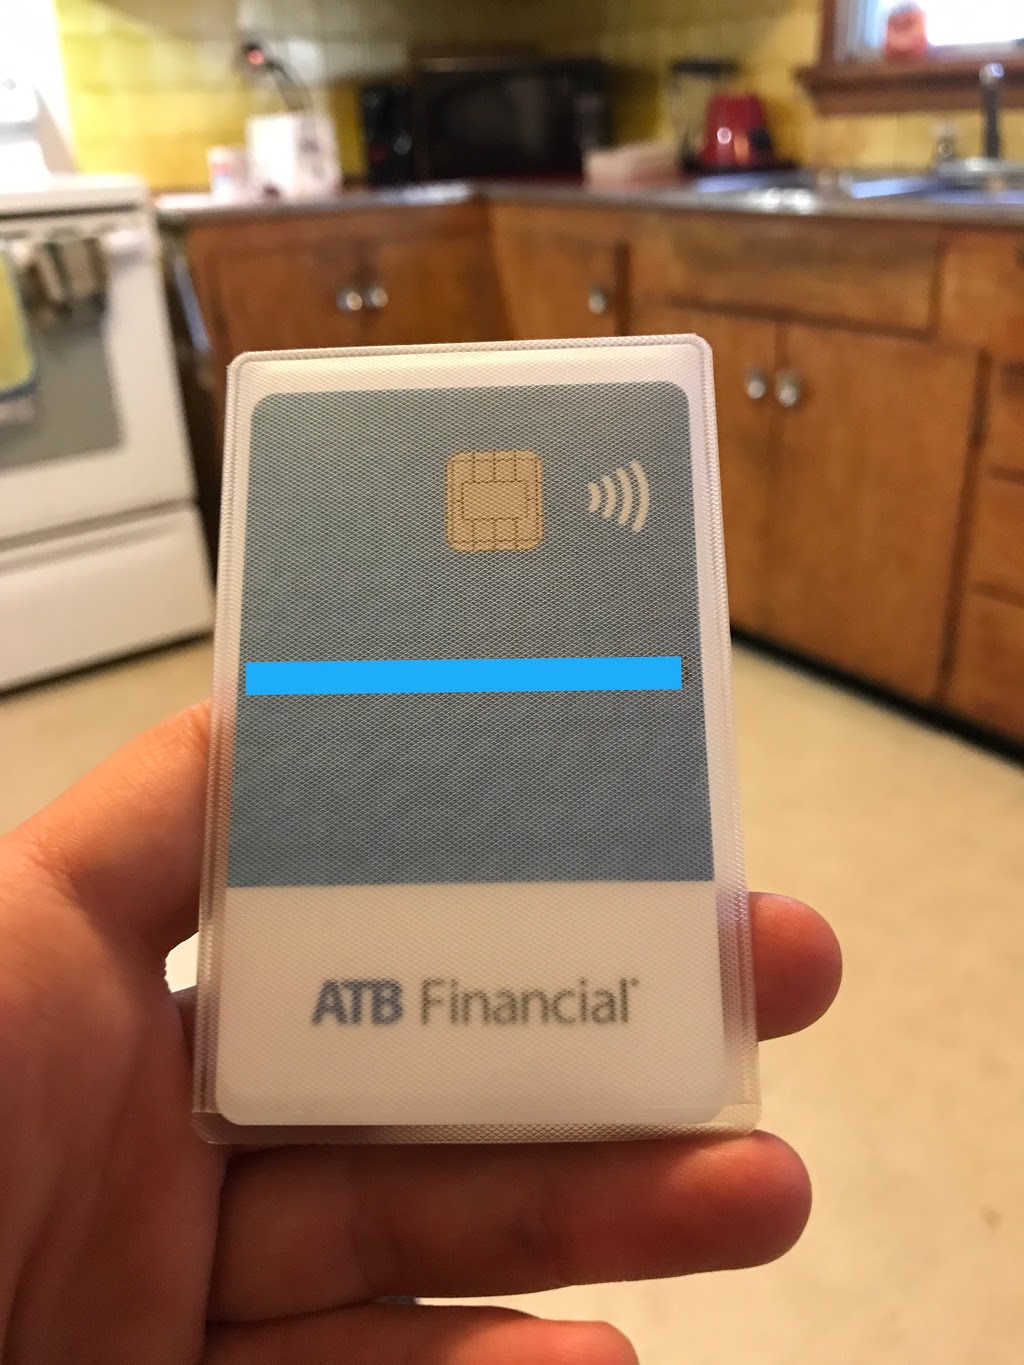 ATB Financial | atm | 8804 118 Ave NW, Edmonton, AB T5B 0T4, Canada | 7804274171 OR +1 780-427-4171